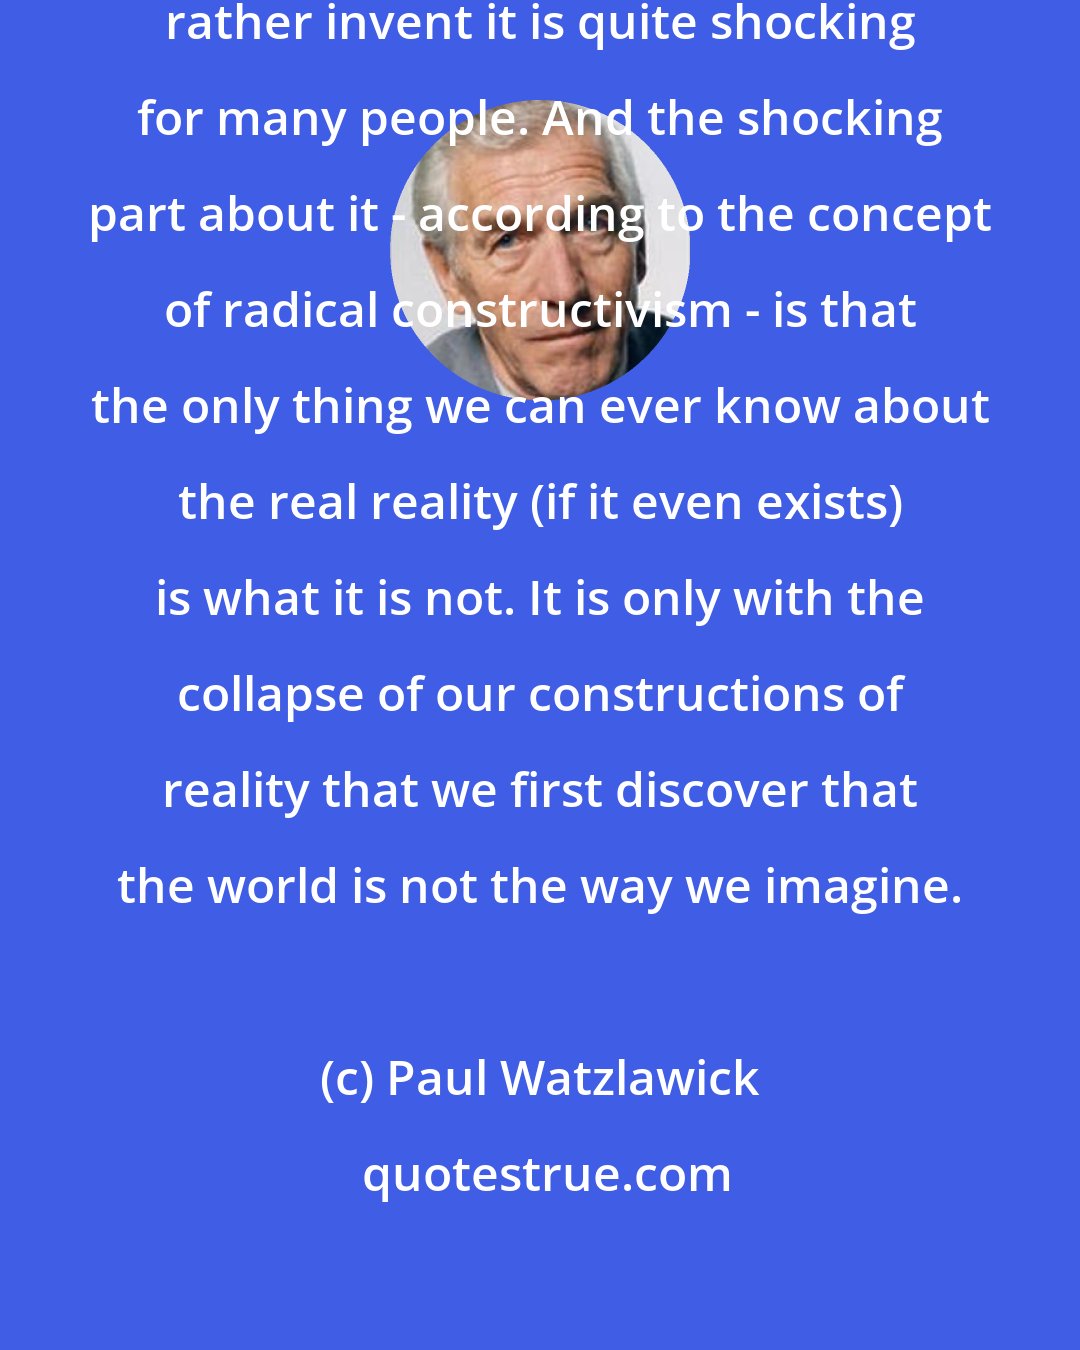 Paul Watzlawick: That we do not discover reality but rather invent it is quite shocking for many people. And the shocking part about it - according to the concept of radical constructivism - is that the only thing we can ever know about the real reality (if it even exists) is what it is not. It is only with the collapse of our constructions of reality that we first discover that the world is not the way we imagine.